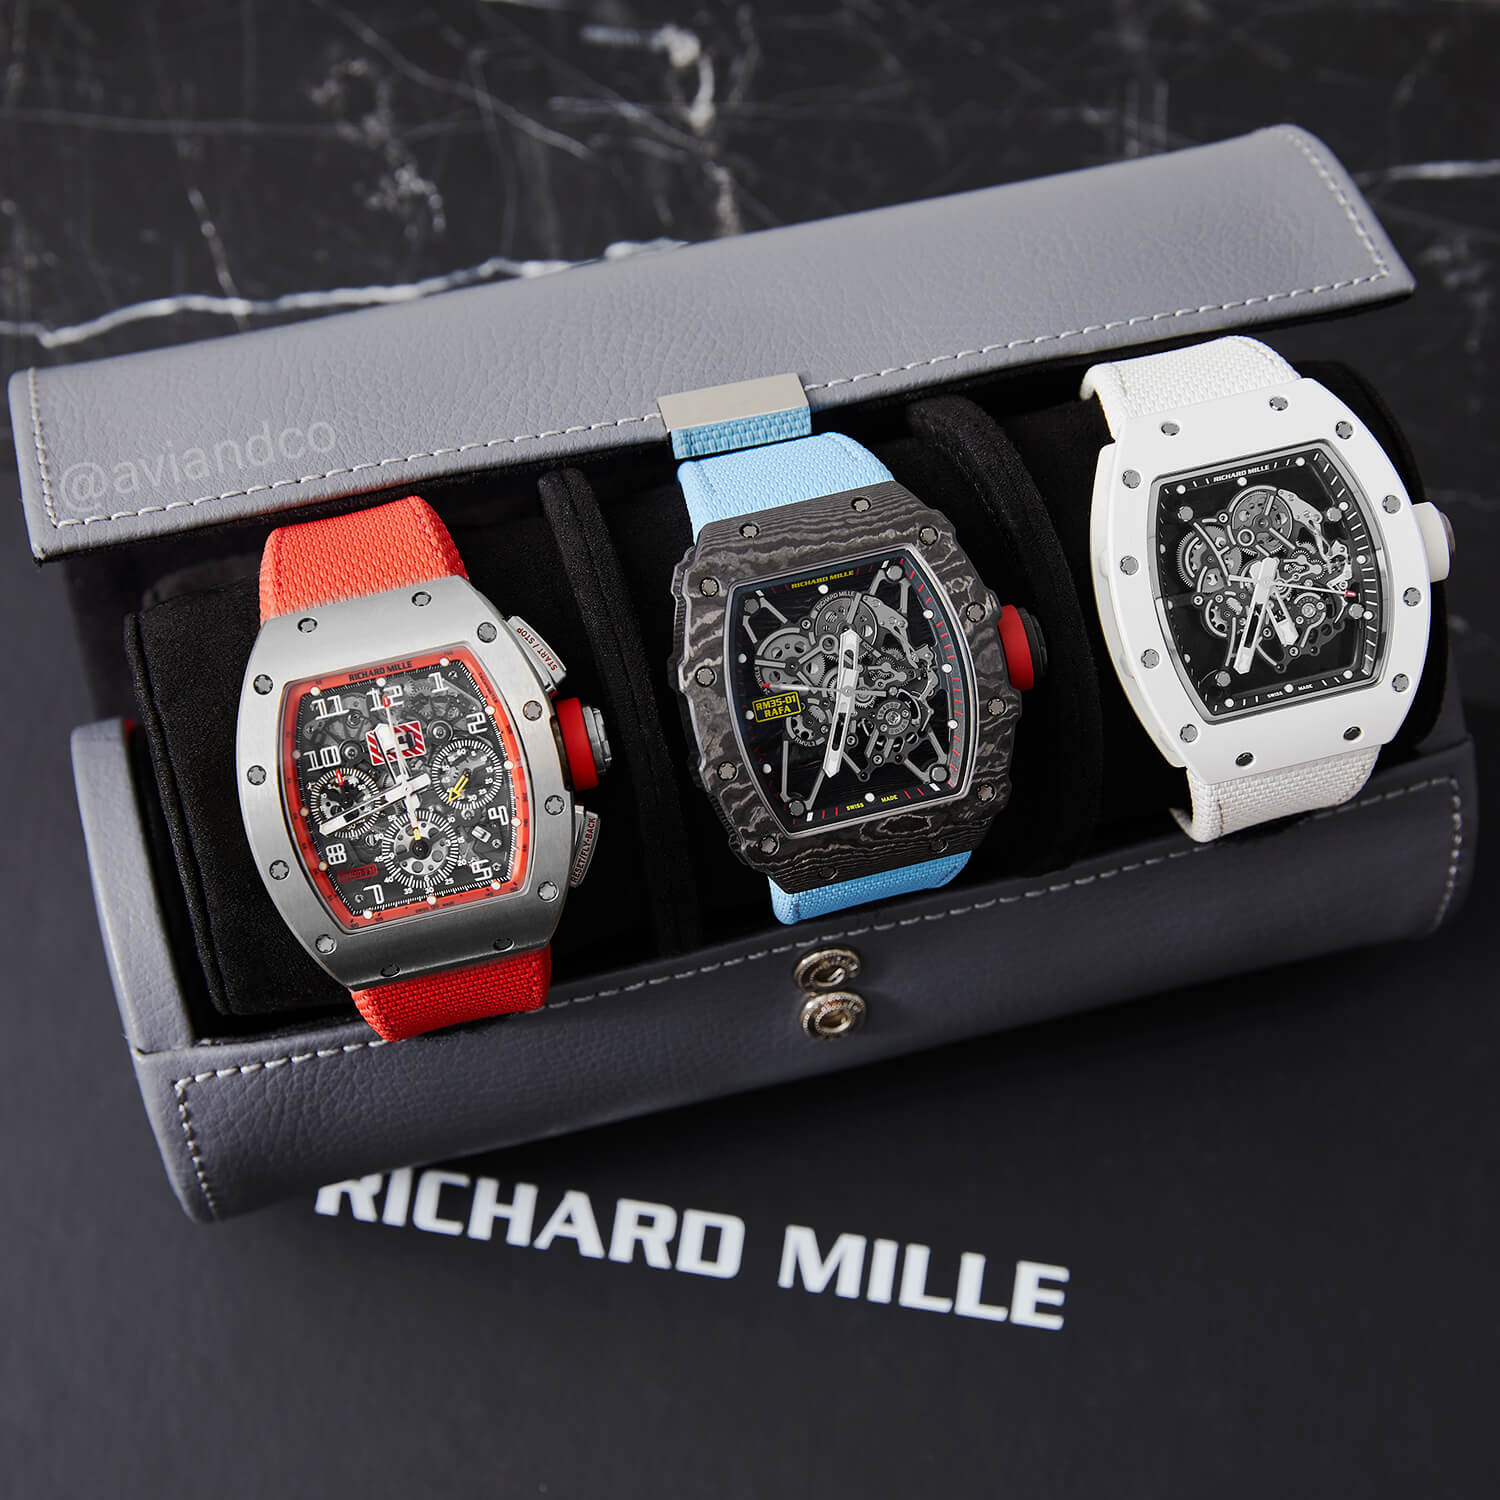 Stainless Steel Bezel with Red Strap, Carbon Bezel with Light Blue Strap, and White Bezel and Strap all in a Black Leather Watch Roll on a Black Background